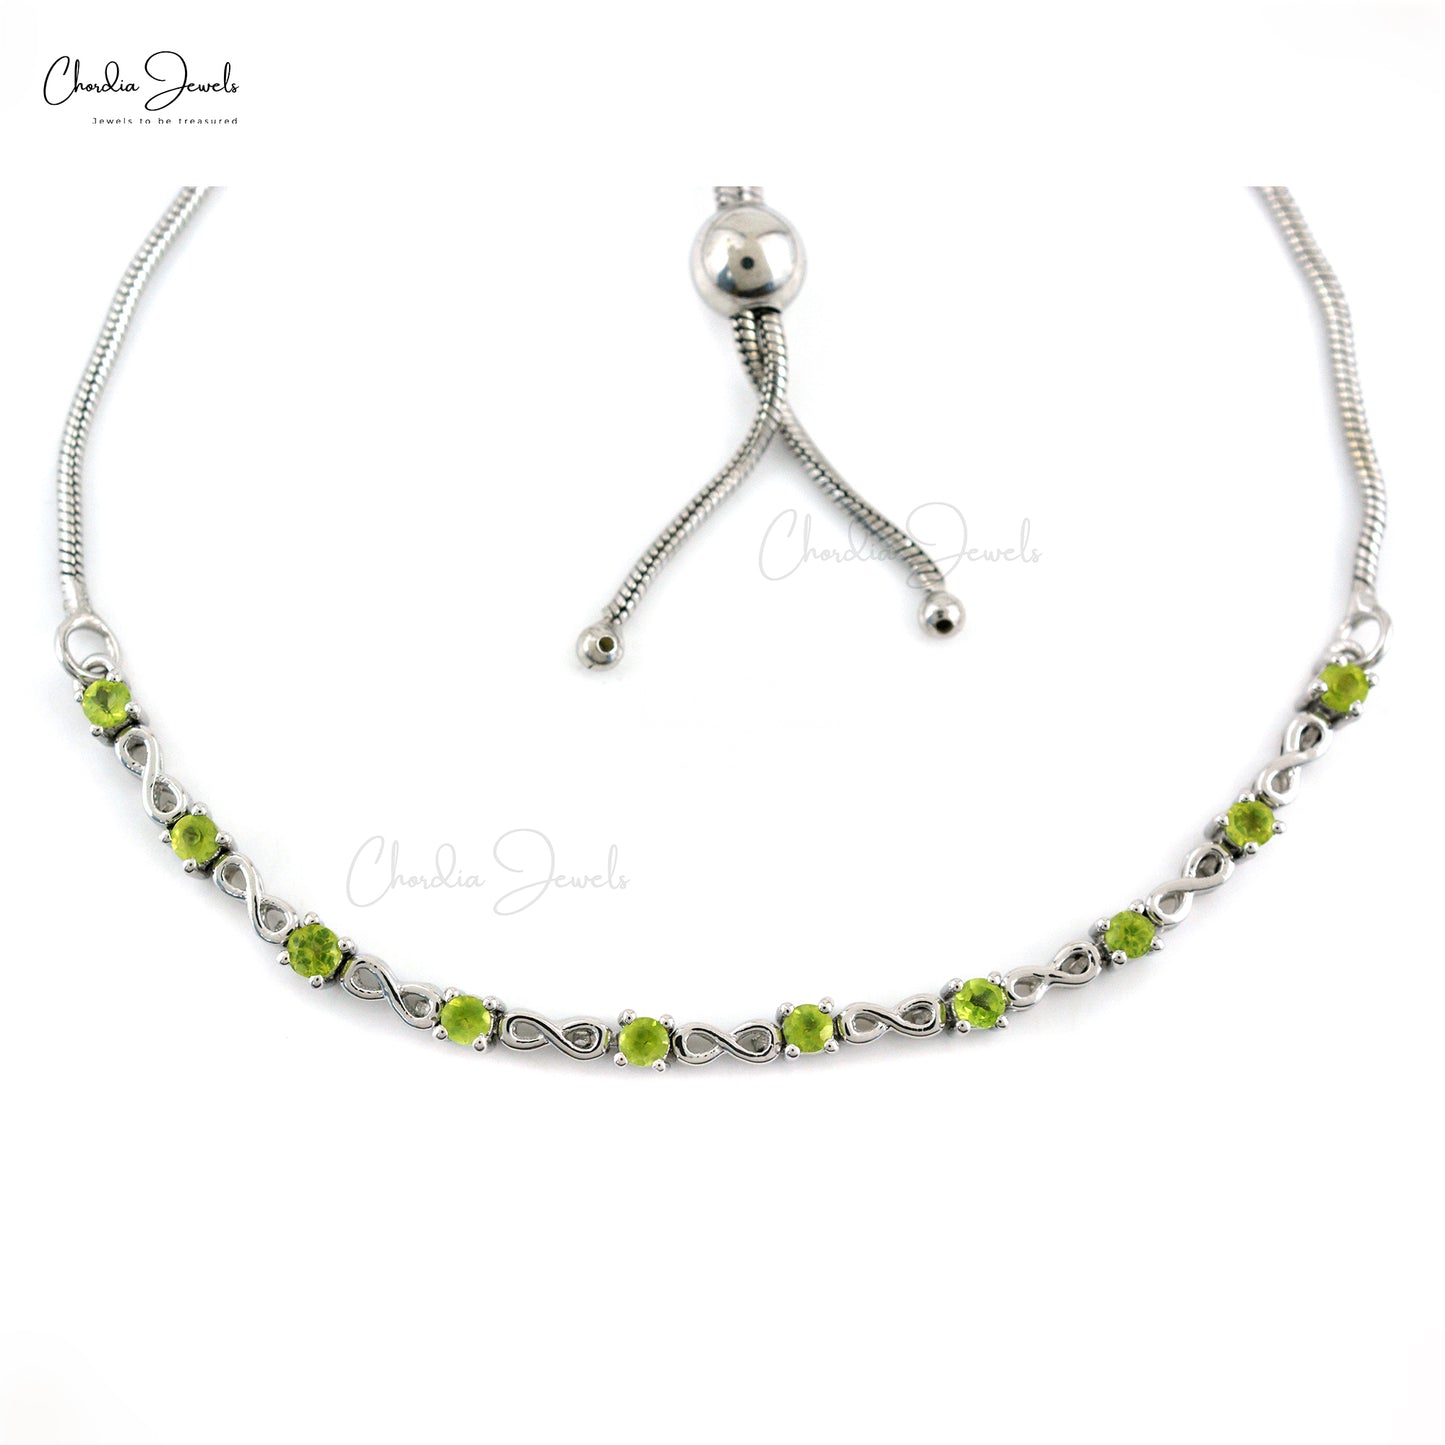 Hot Selling 925 Sterling Silver Jewelry At Offer Price Genuine Peridot Tennis Bracelet 2.5MM Round Cut Gemstone Jewelry